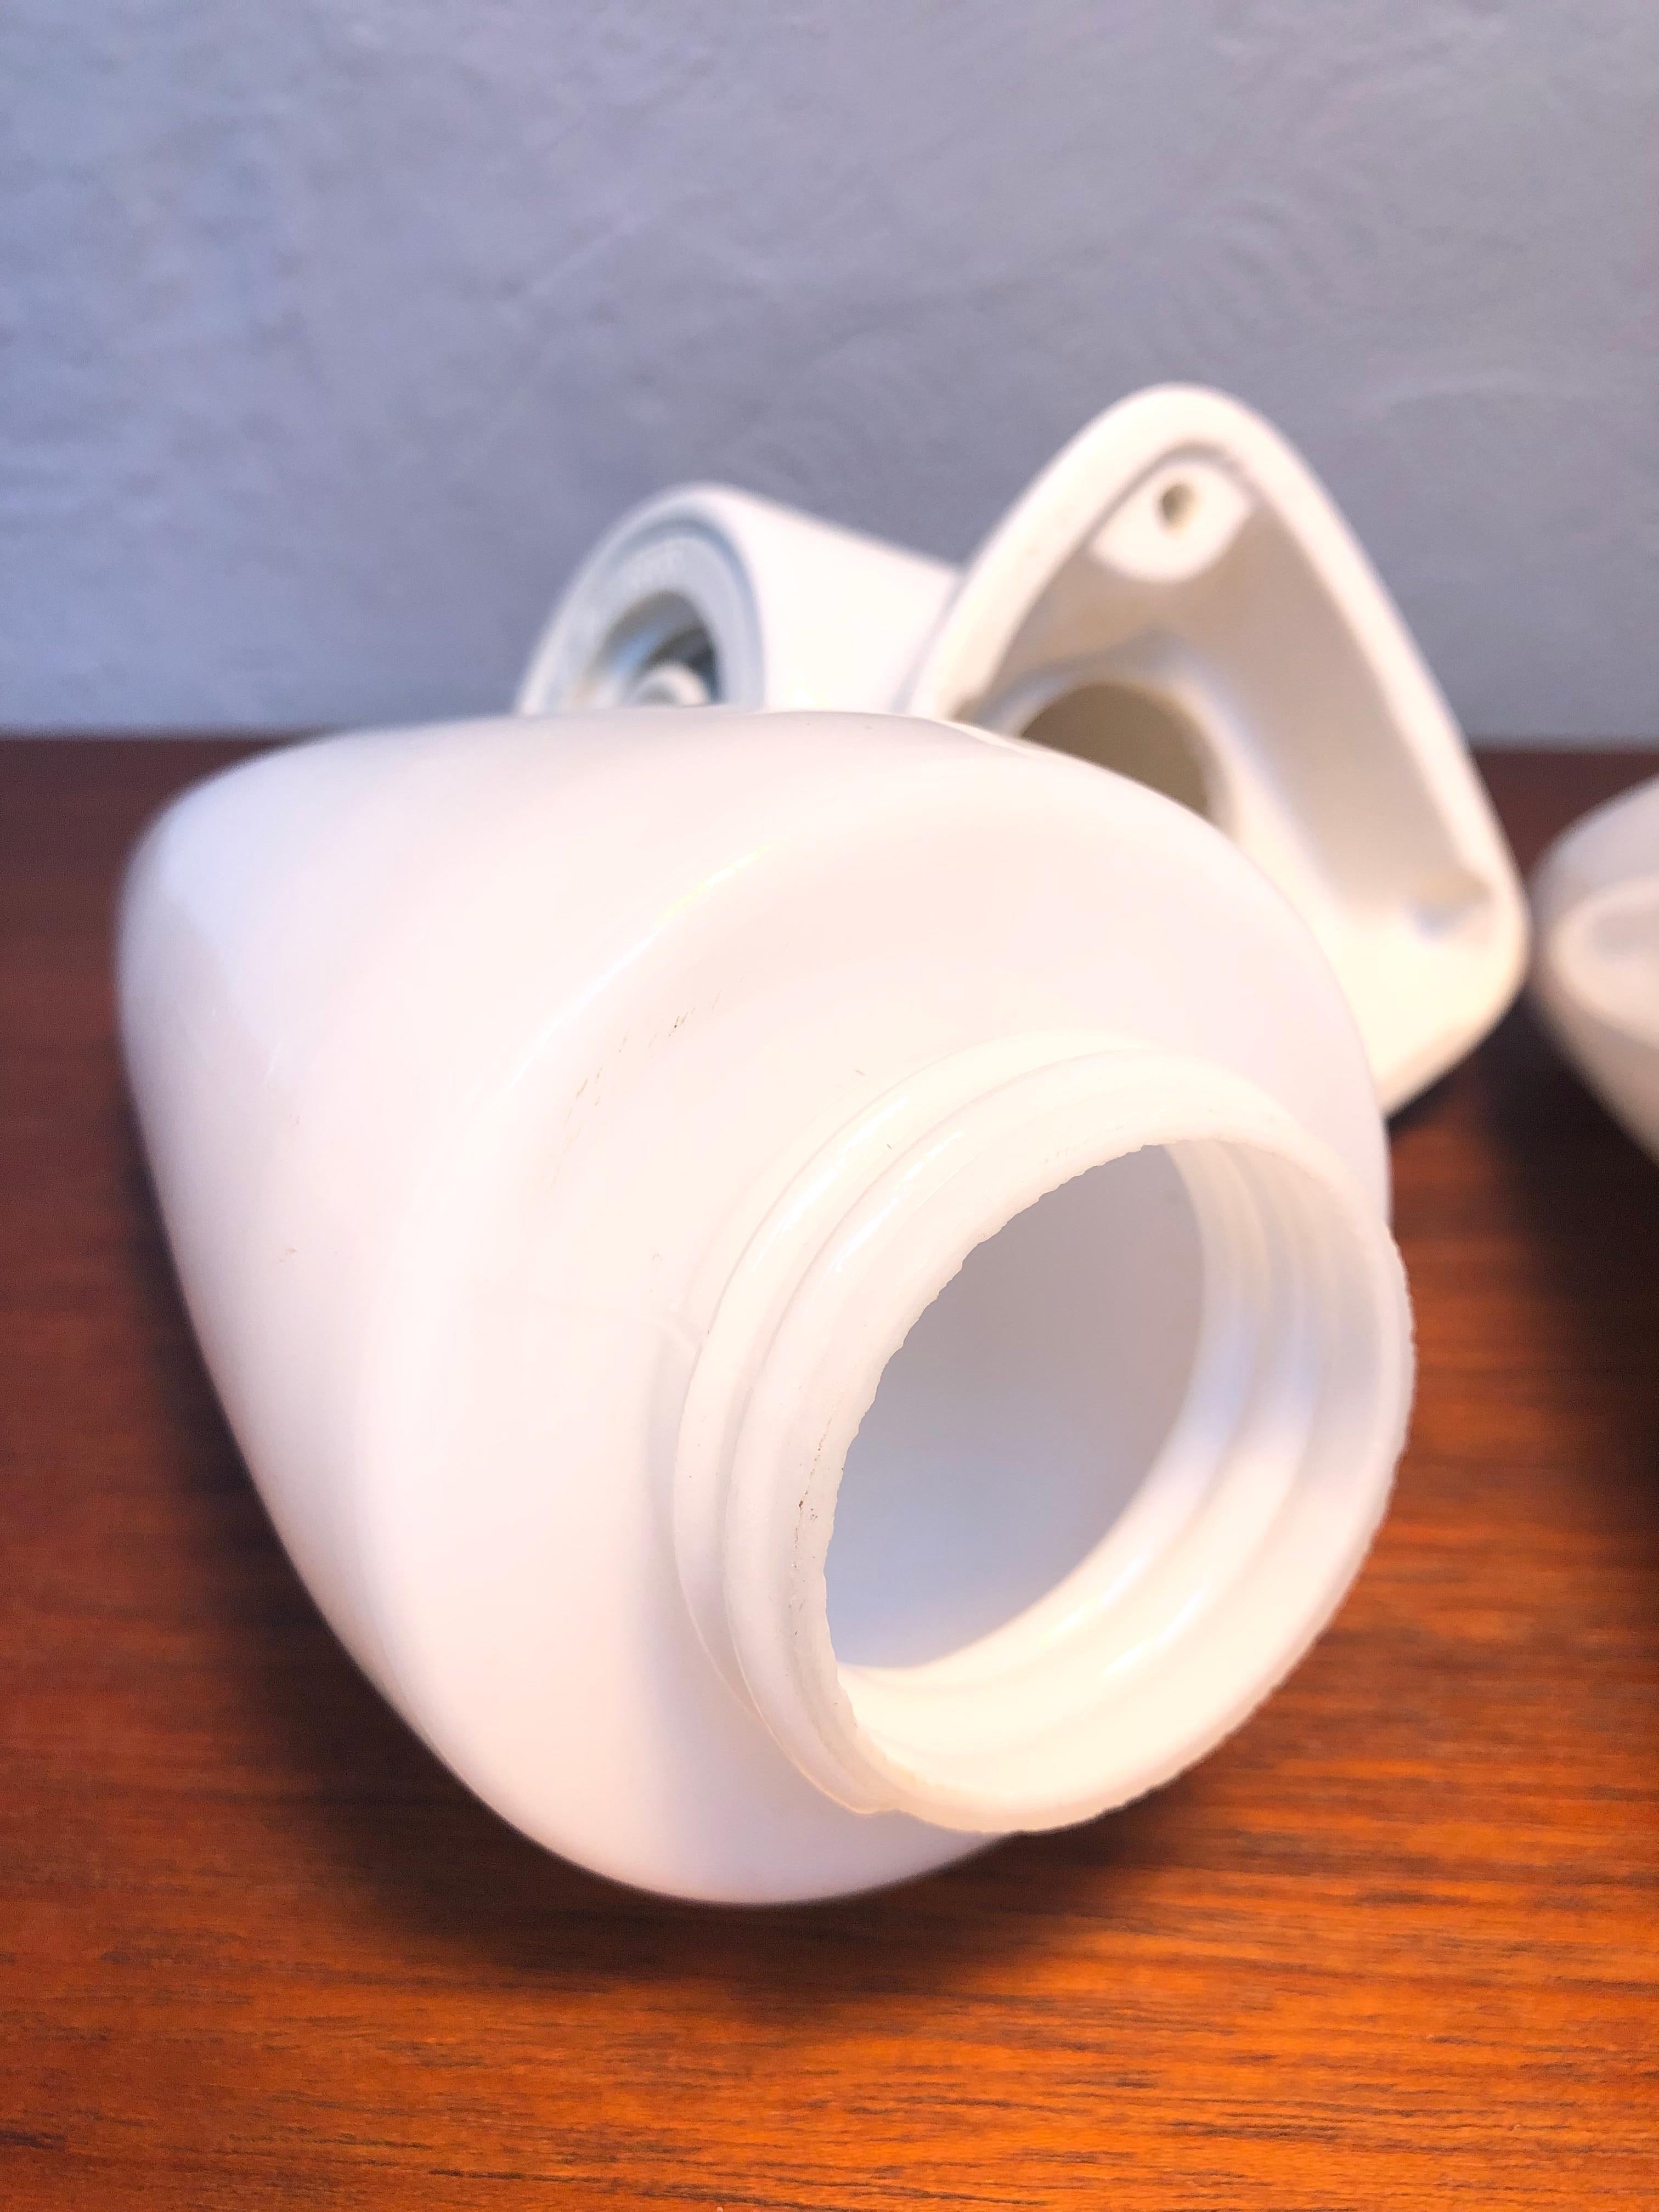 Vintage Ifö of Sweden Ceramic Bathroom Lamps with Opaline Shades from the 1960s For Sale 2